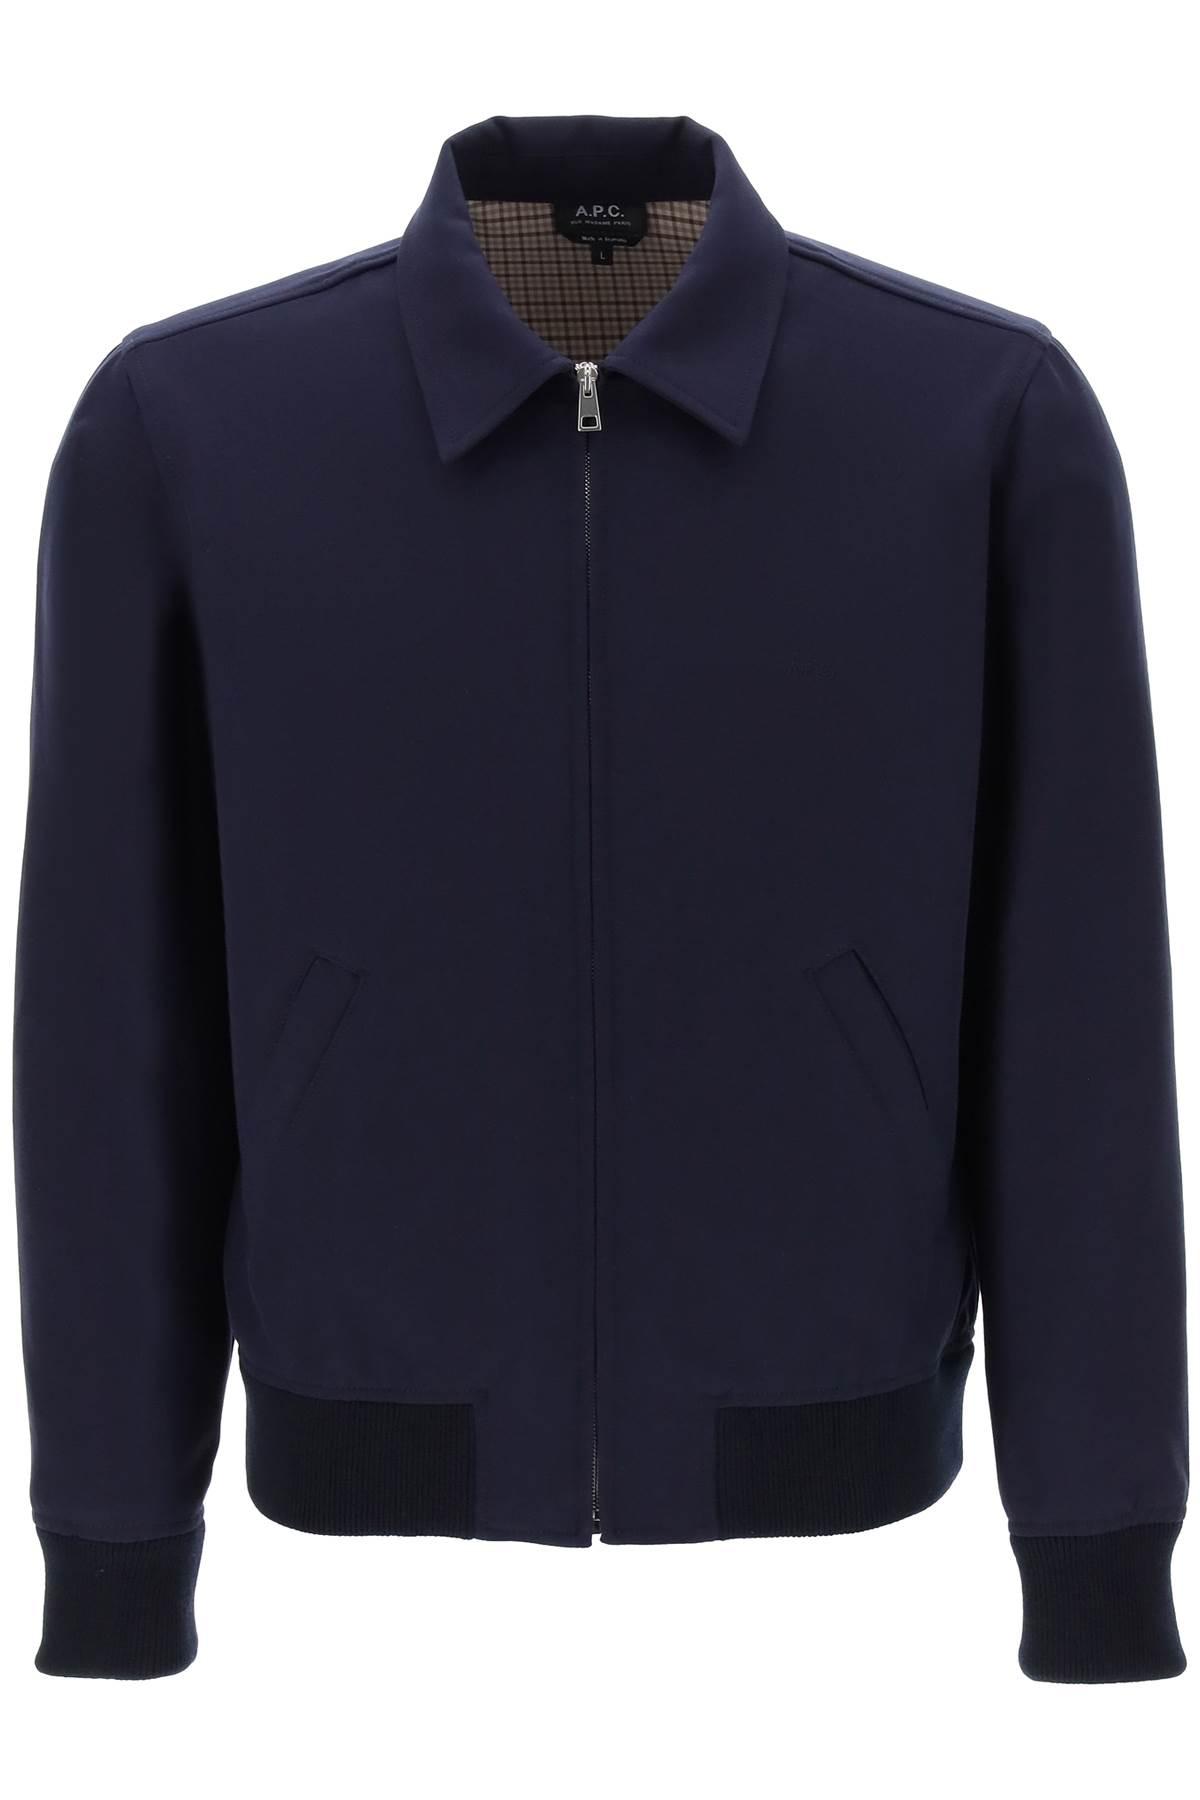 A.P.C. 'sutherland' Blouson Jacket in Blue for Men | Lyst